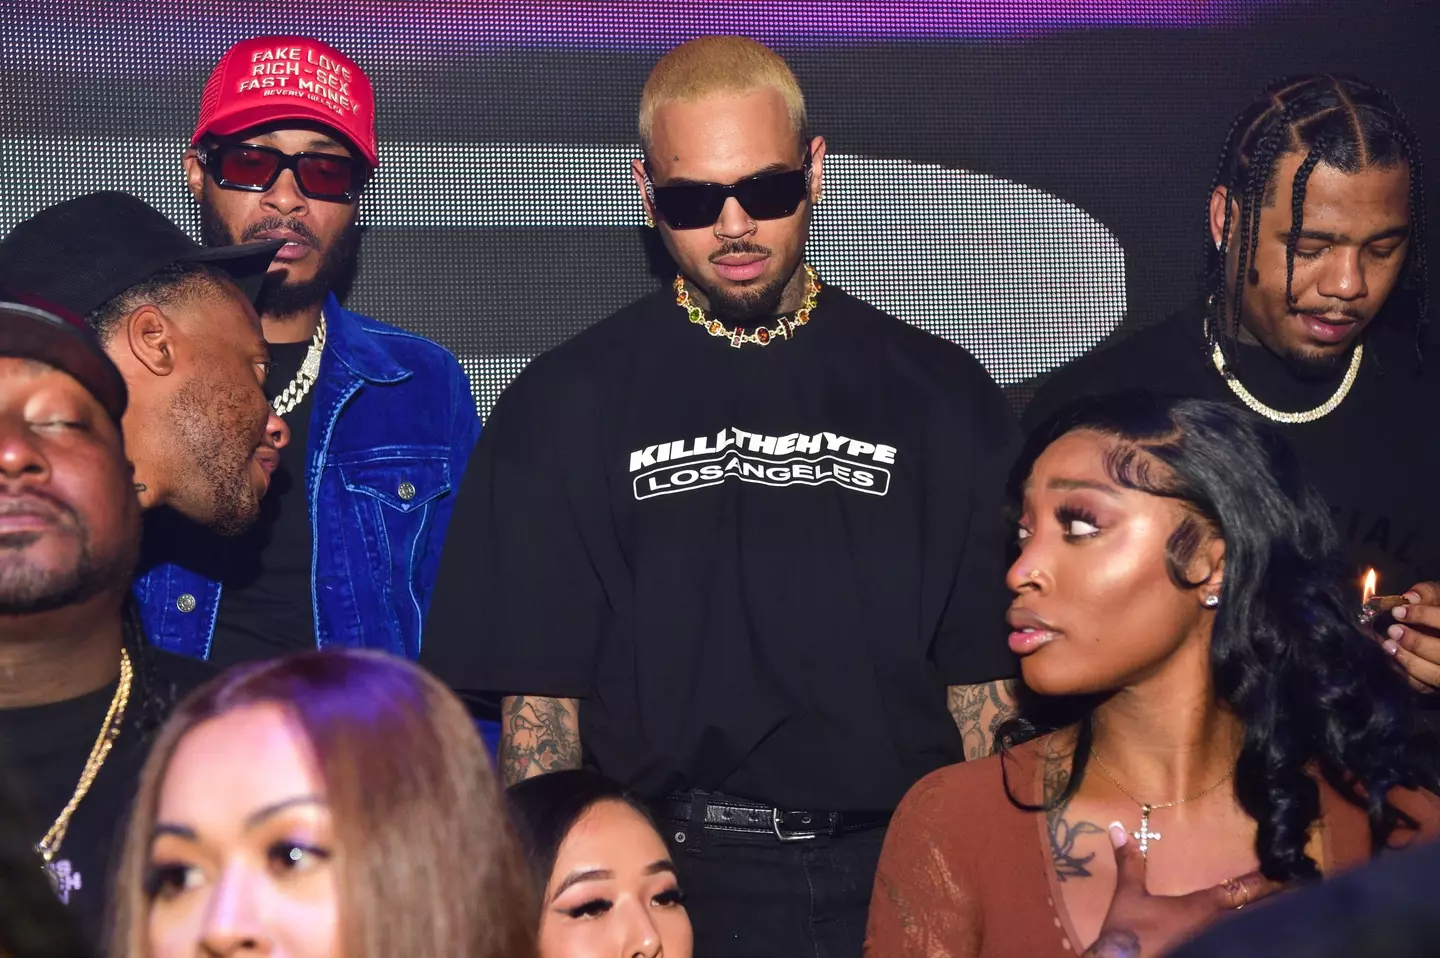 The plaintiff claims Chris Brown 'beat' them in a nightclub in London.